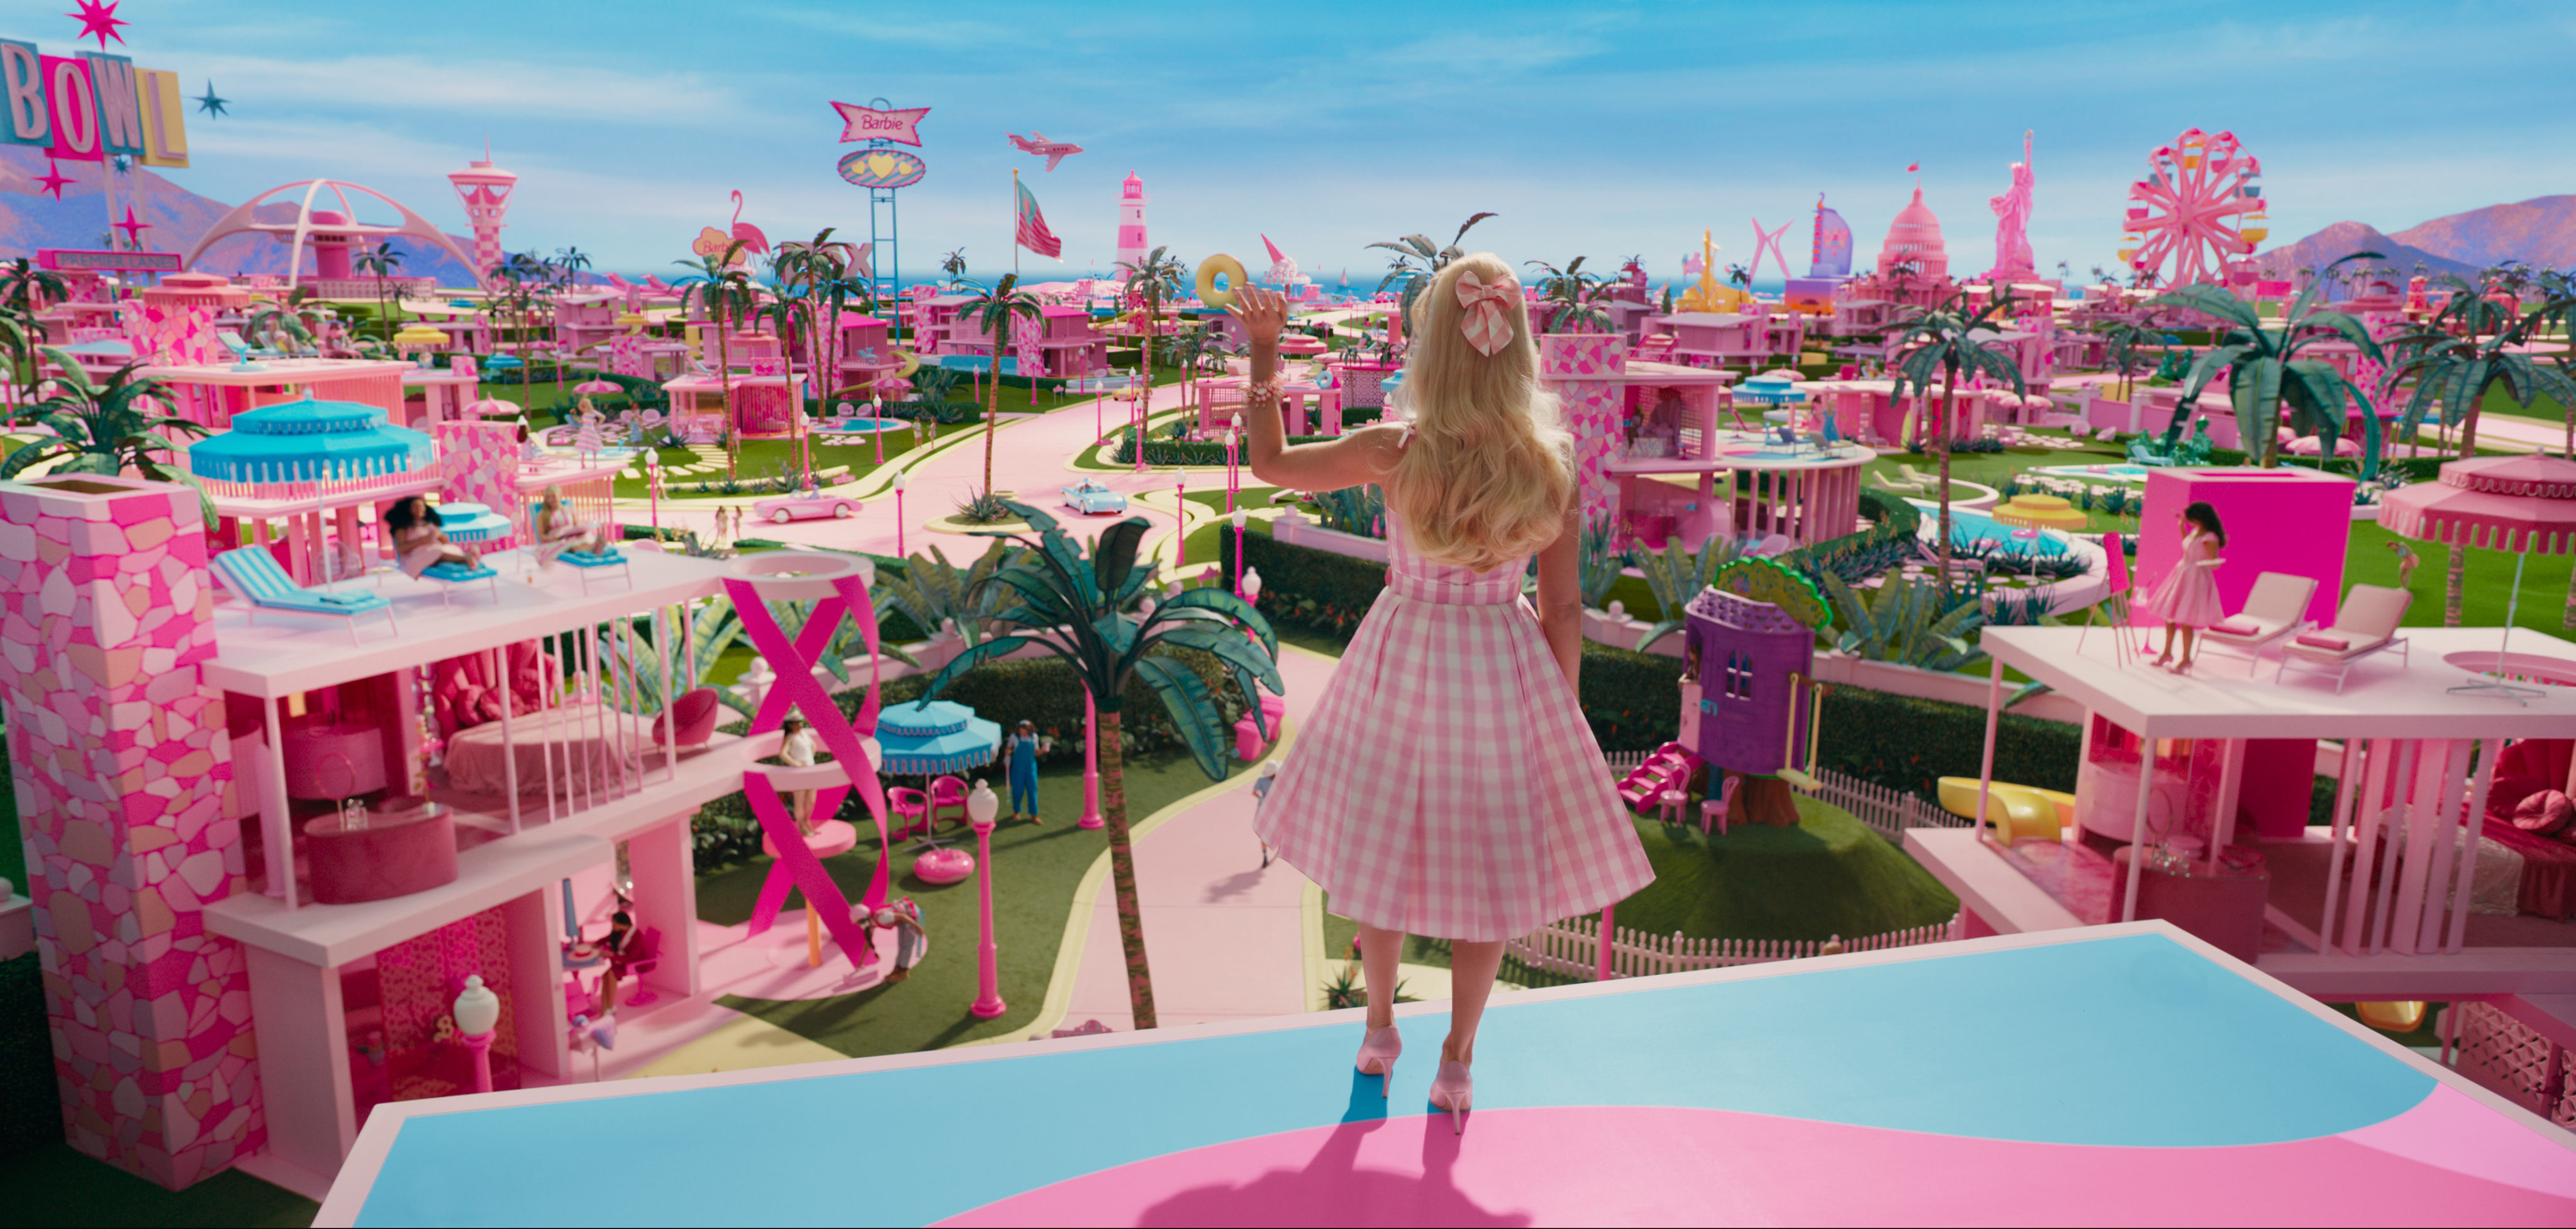 A still from the film Barbie, which set a slew of records in its opening weekend. Photo: Warner Bros